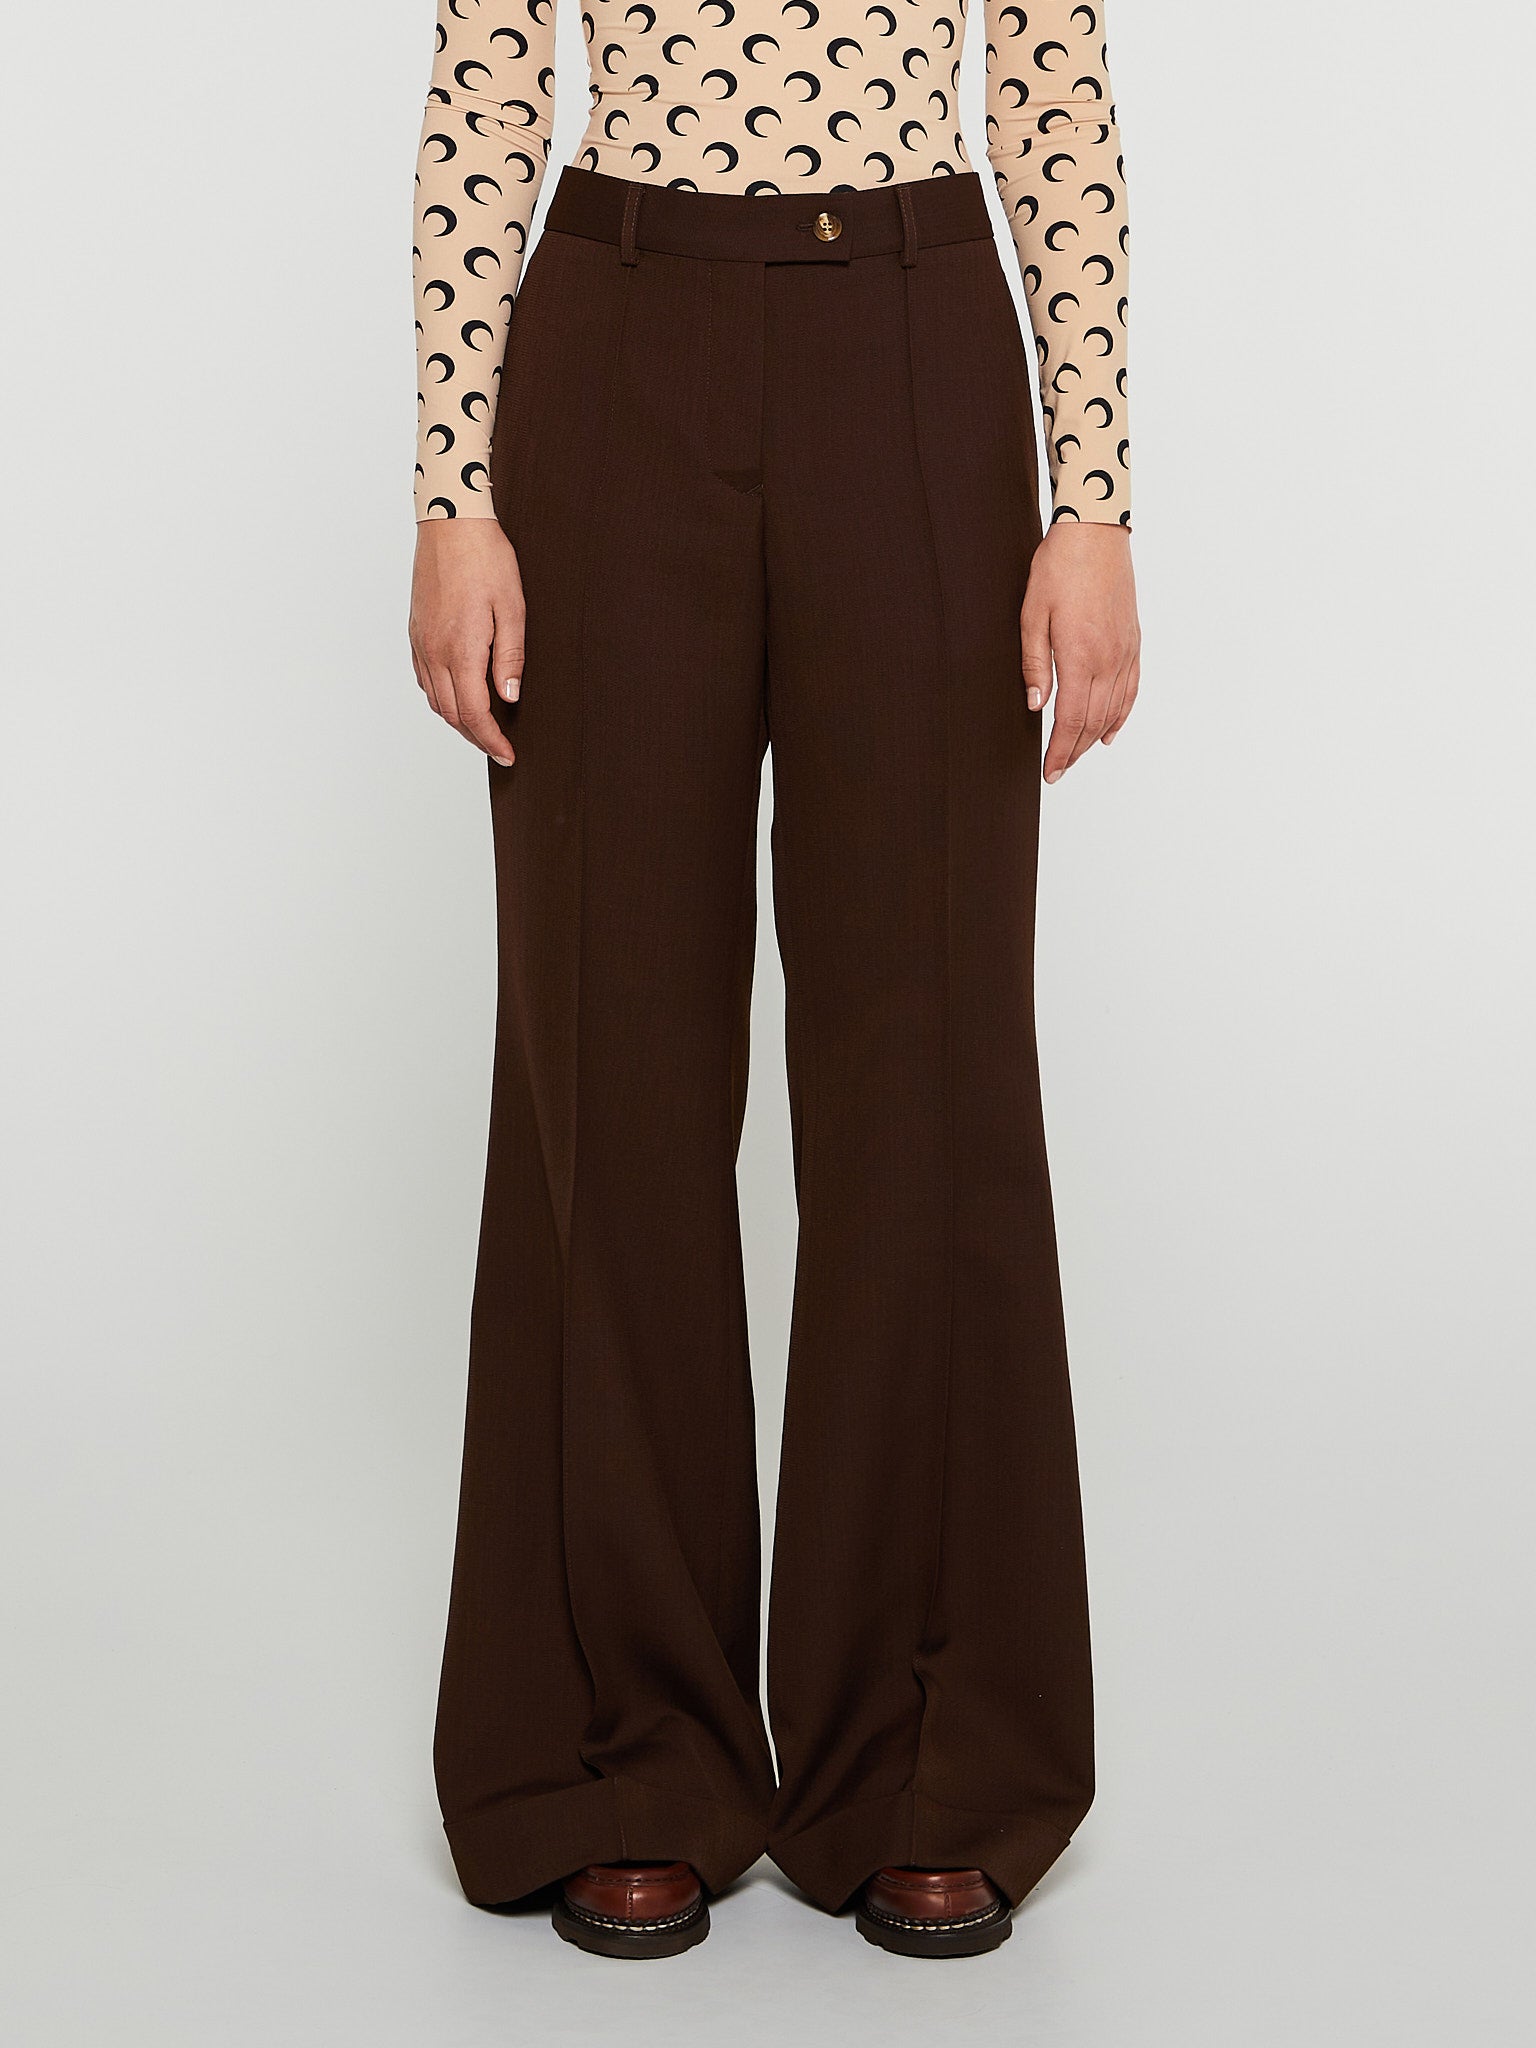 Acne Studios - Tailored Flared Trousers in Chestnut Brown